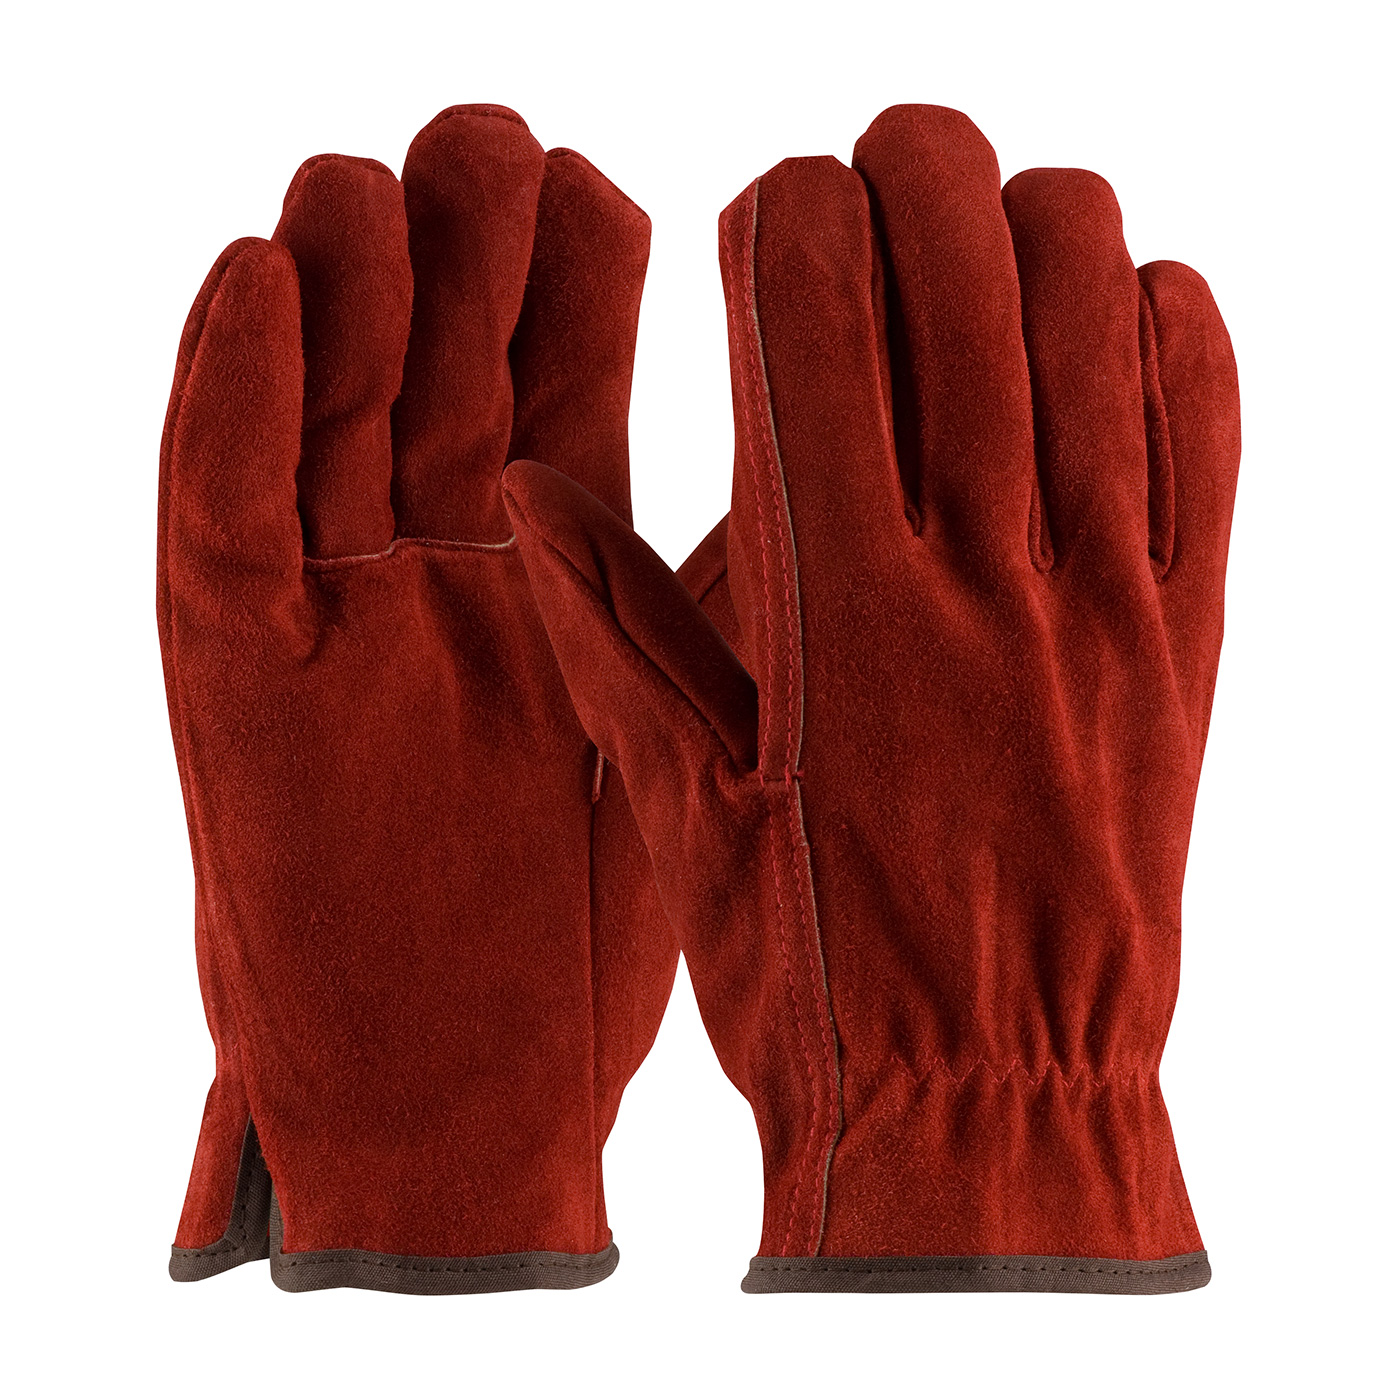 Insulated Leather Drivers Gloves